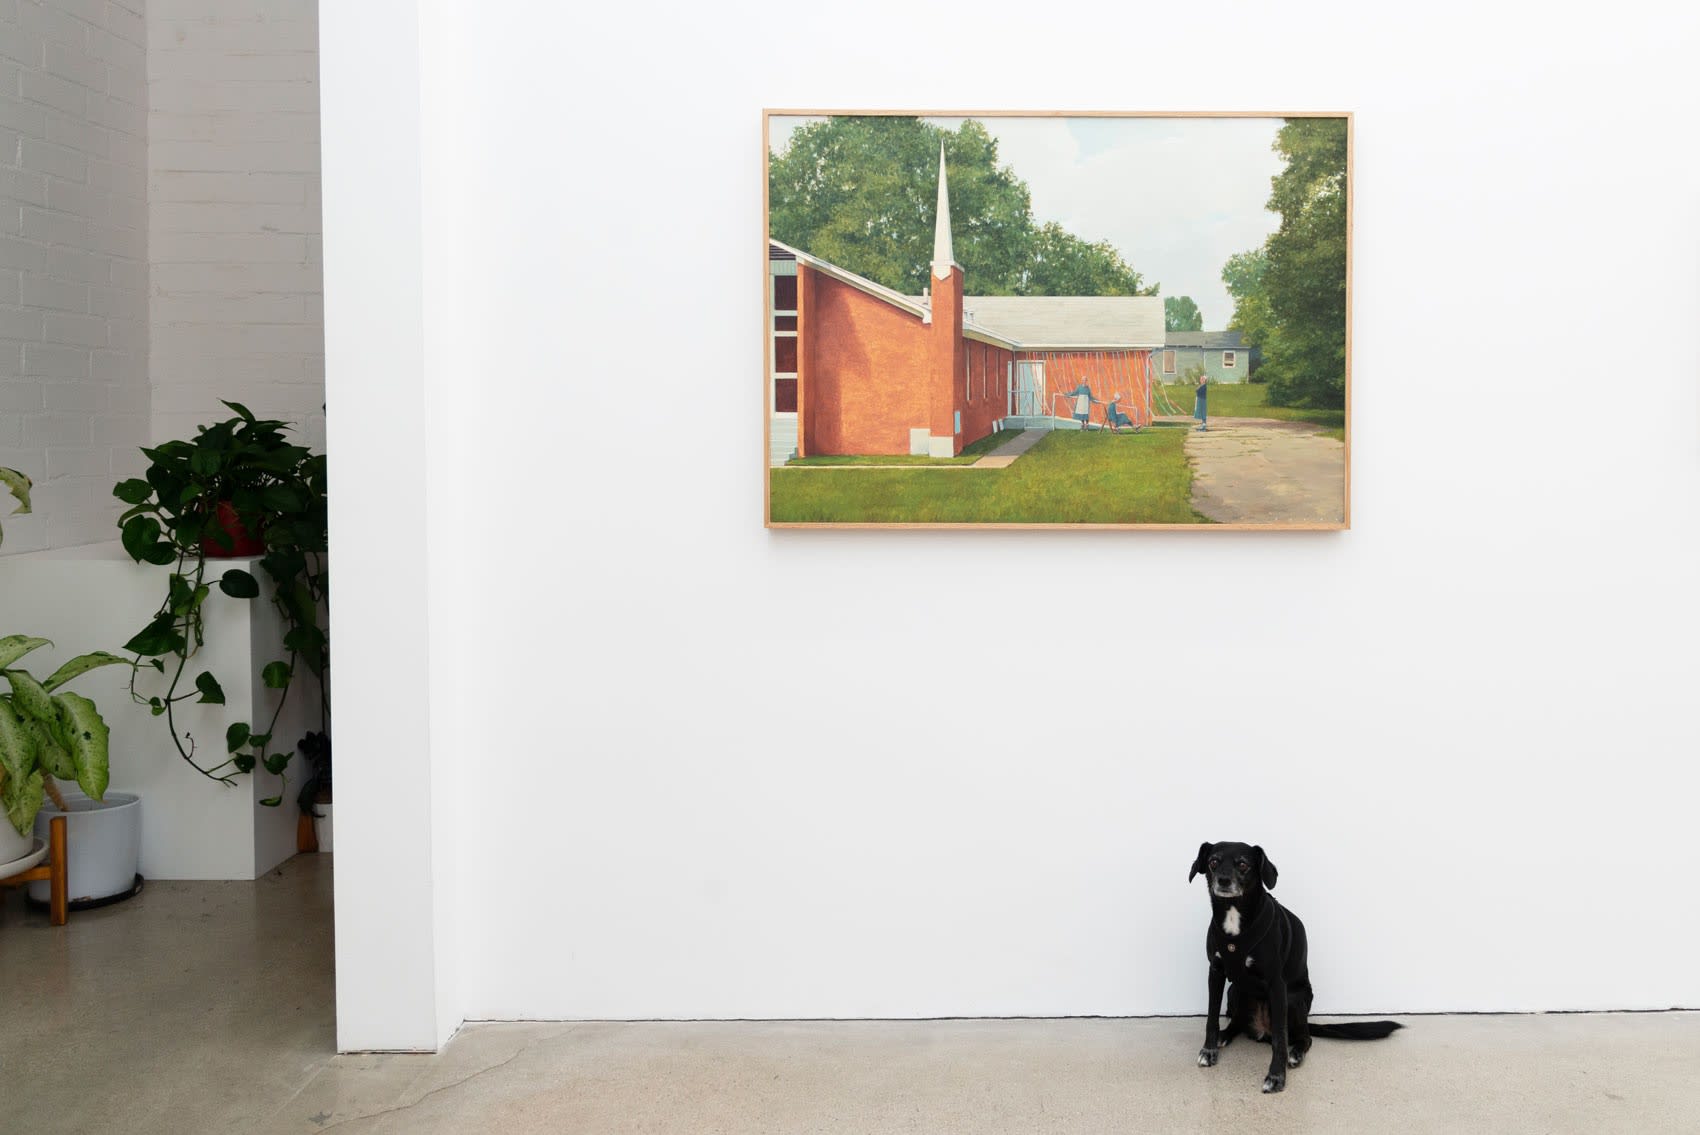 Meera, a small black dog with nervous tendencies, sits in front of Pat's painting of amish women roller blading in front of a red church.